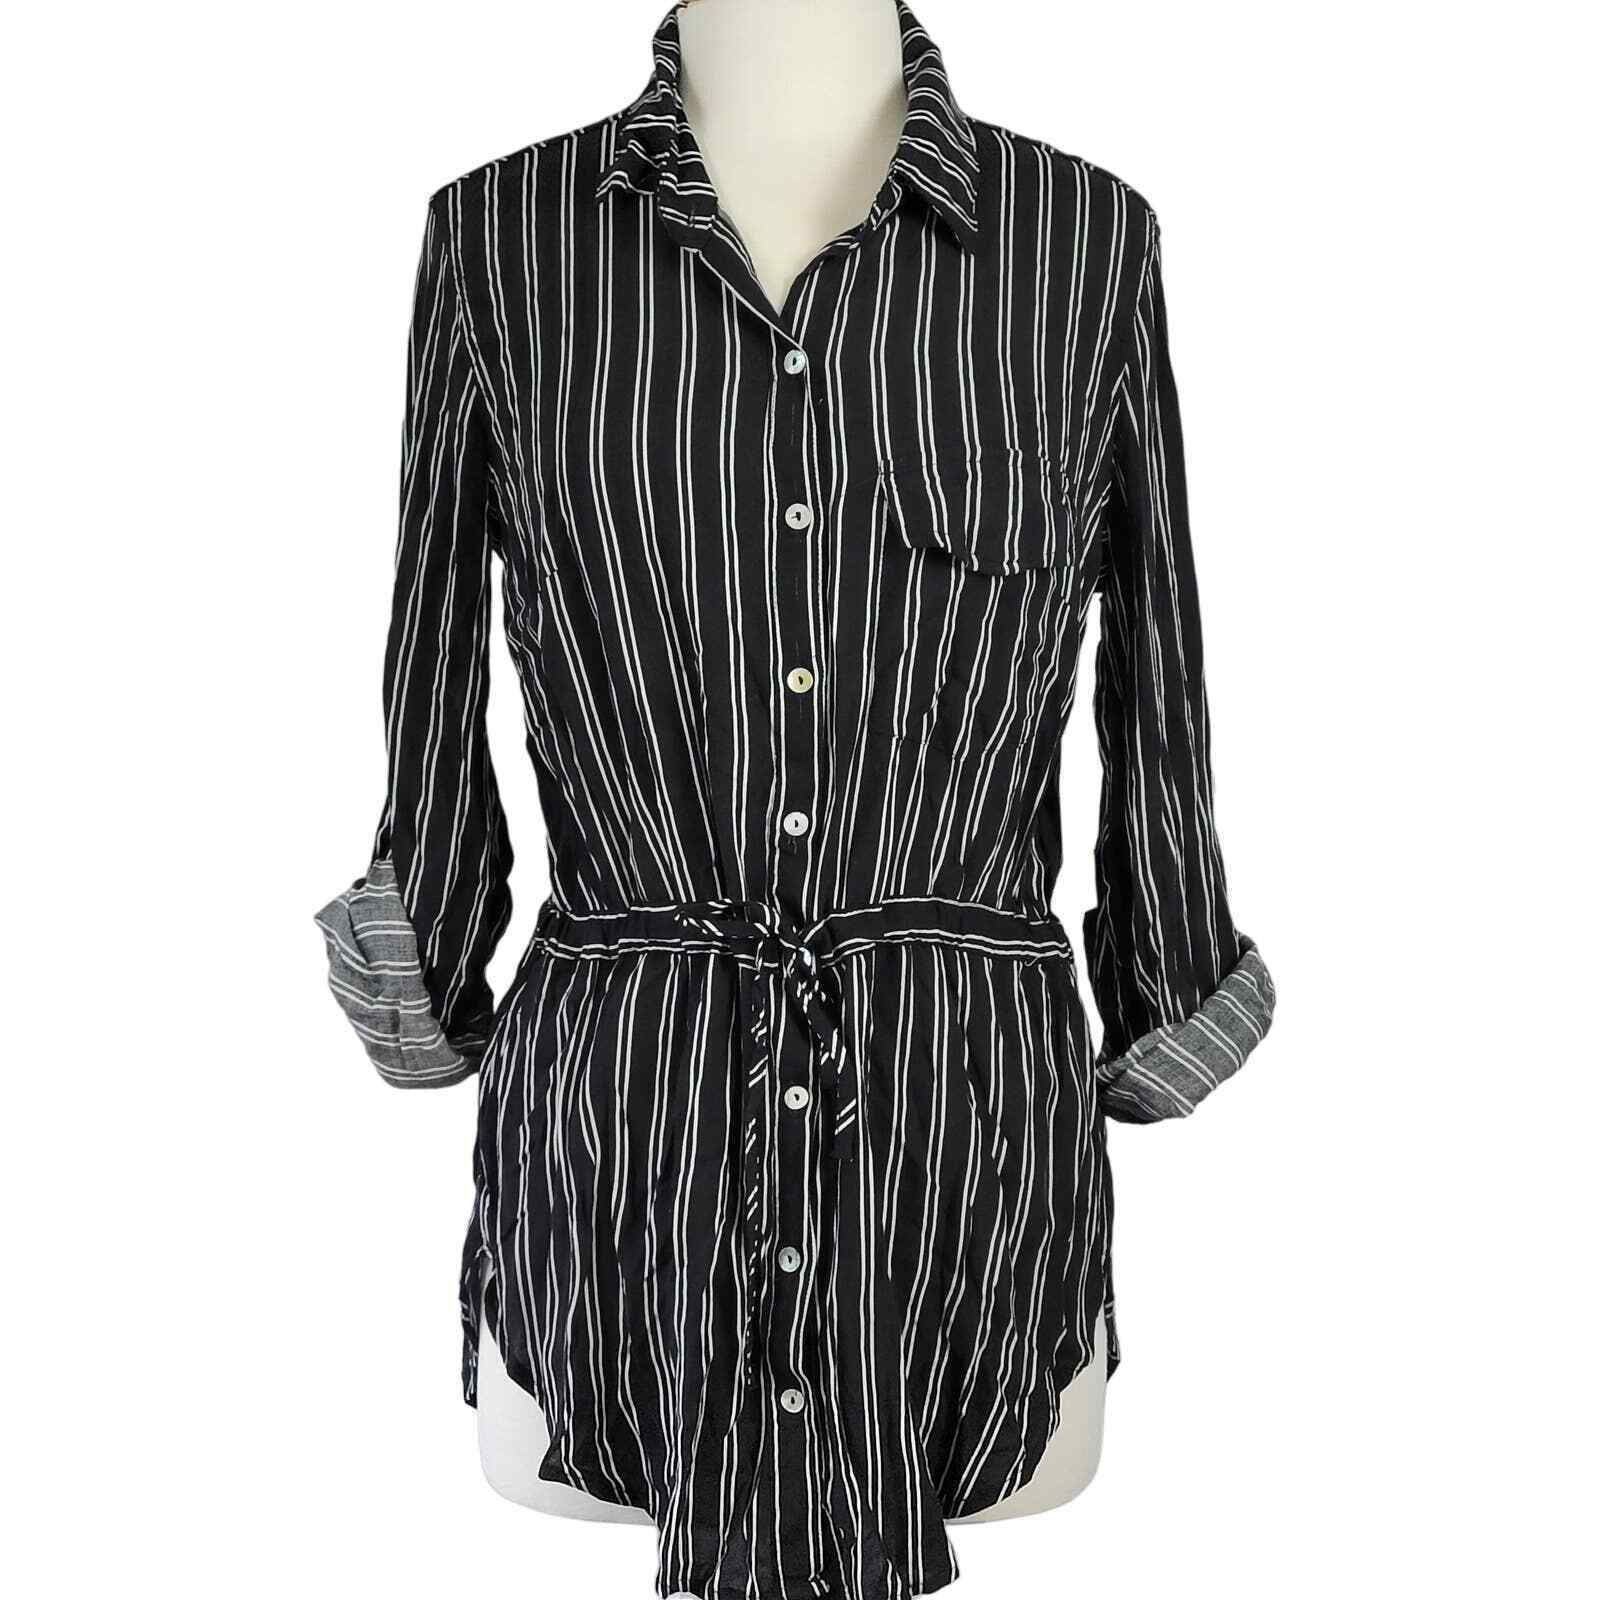 Primary image for Just Living The Dream Womens Shirt Black Stripe Tunic Casual 3/4 Sleeves Buttons